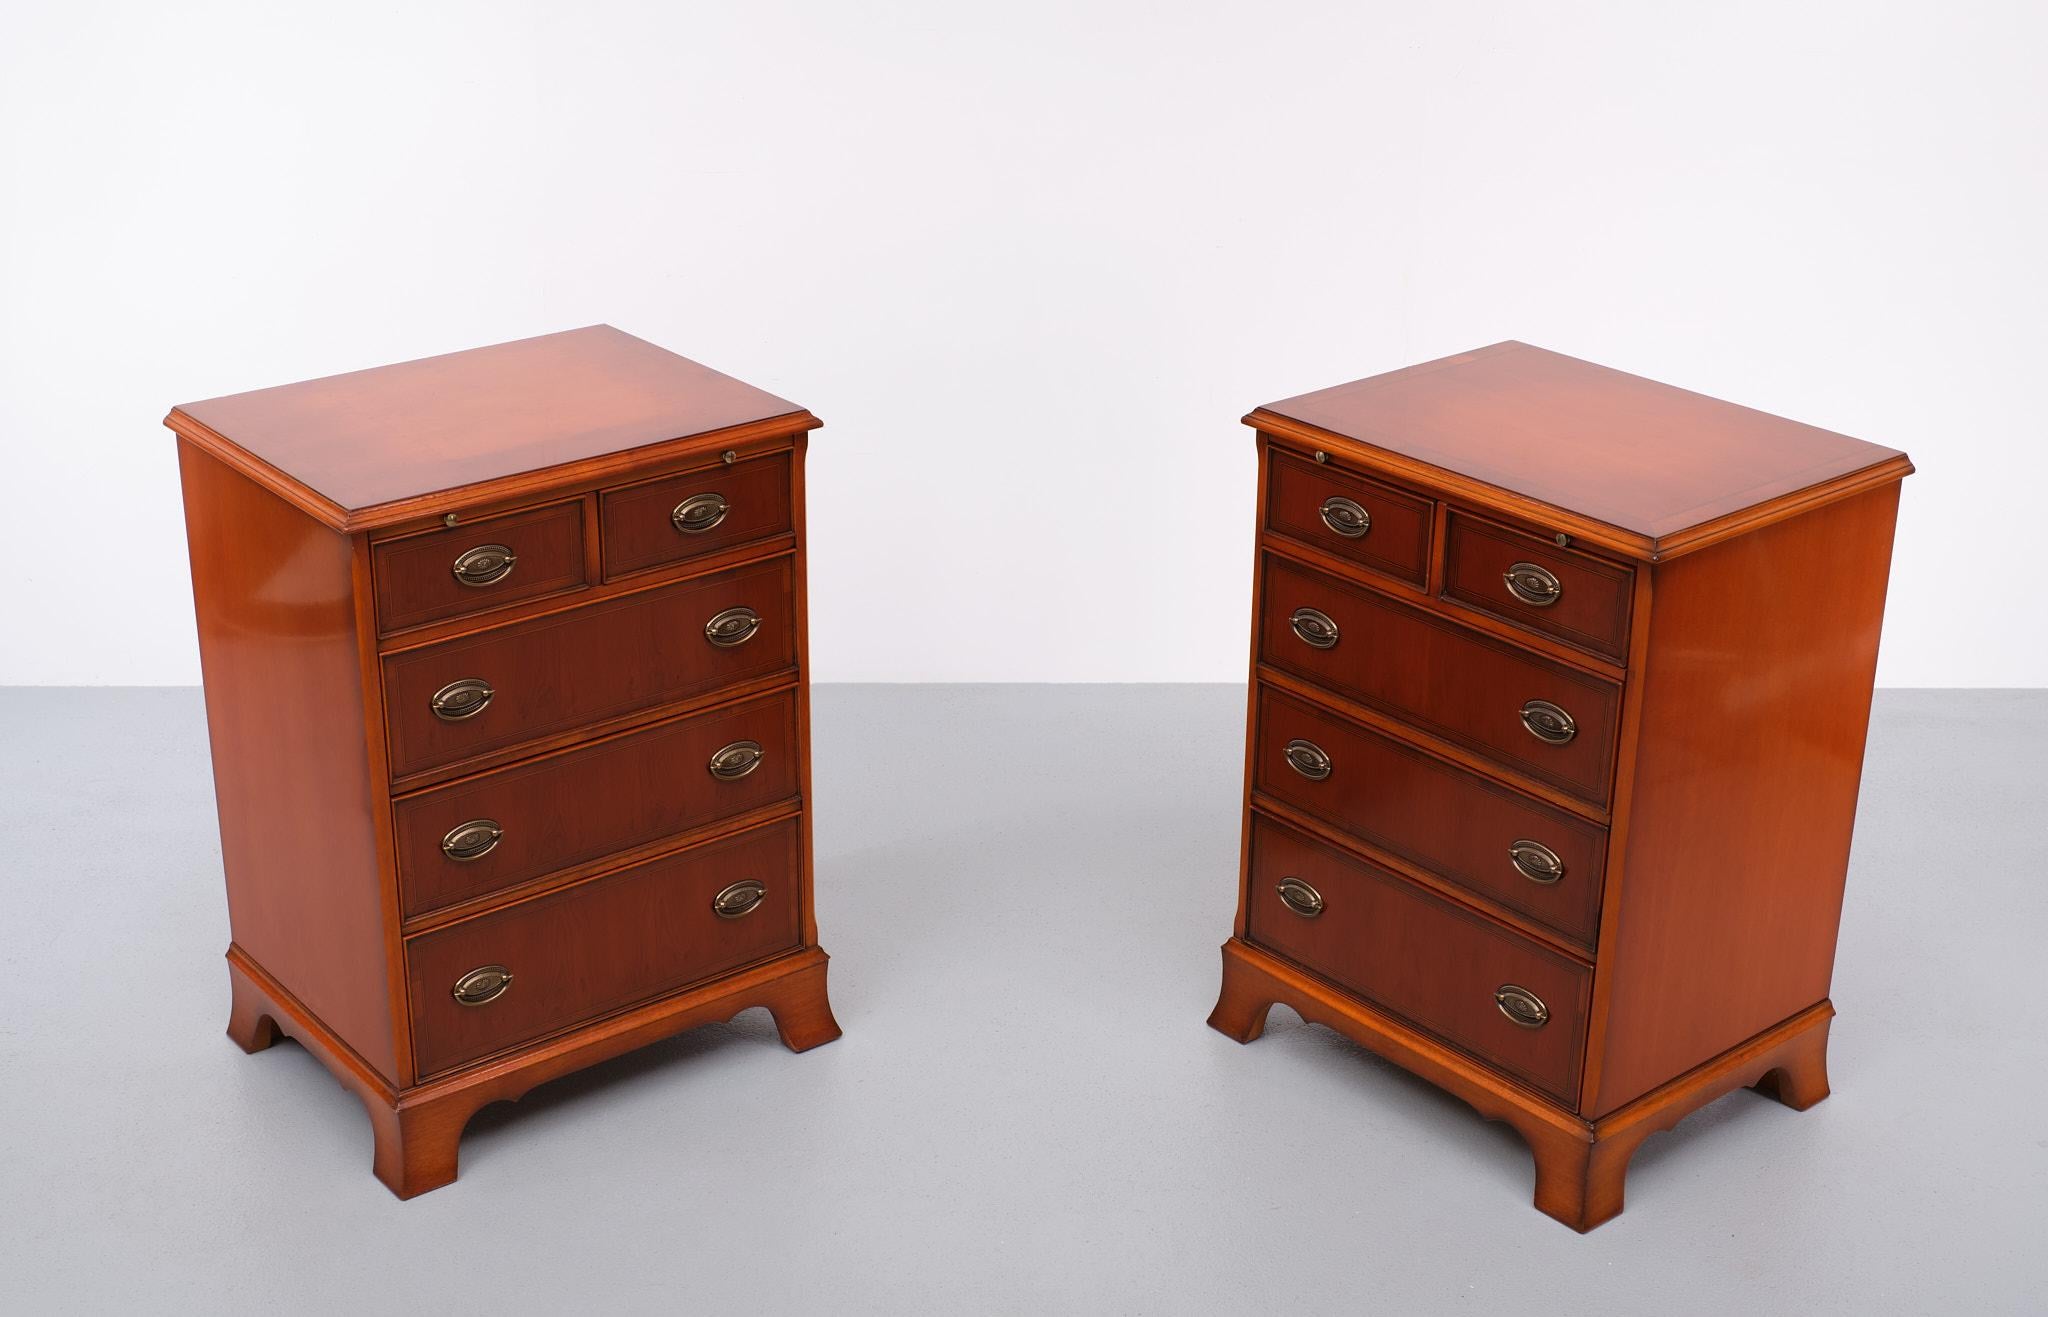 Superb Edwardian Cherry Wood Cabinets  1970s England  In Good Condition For Sale In Den Haag, NL